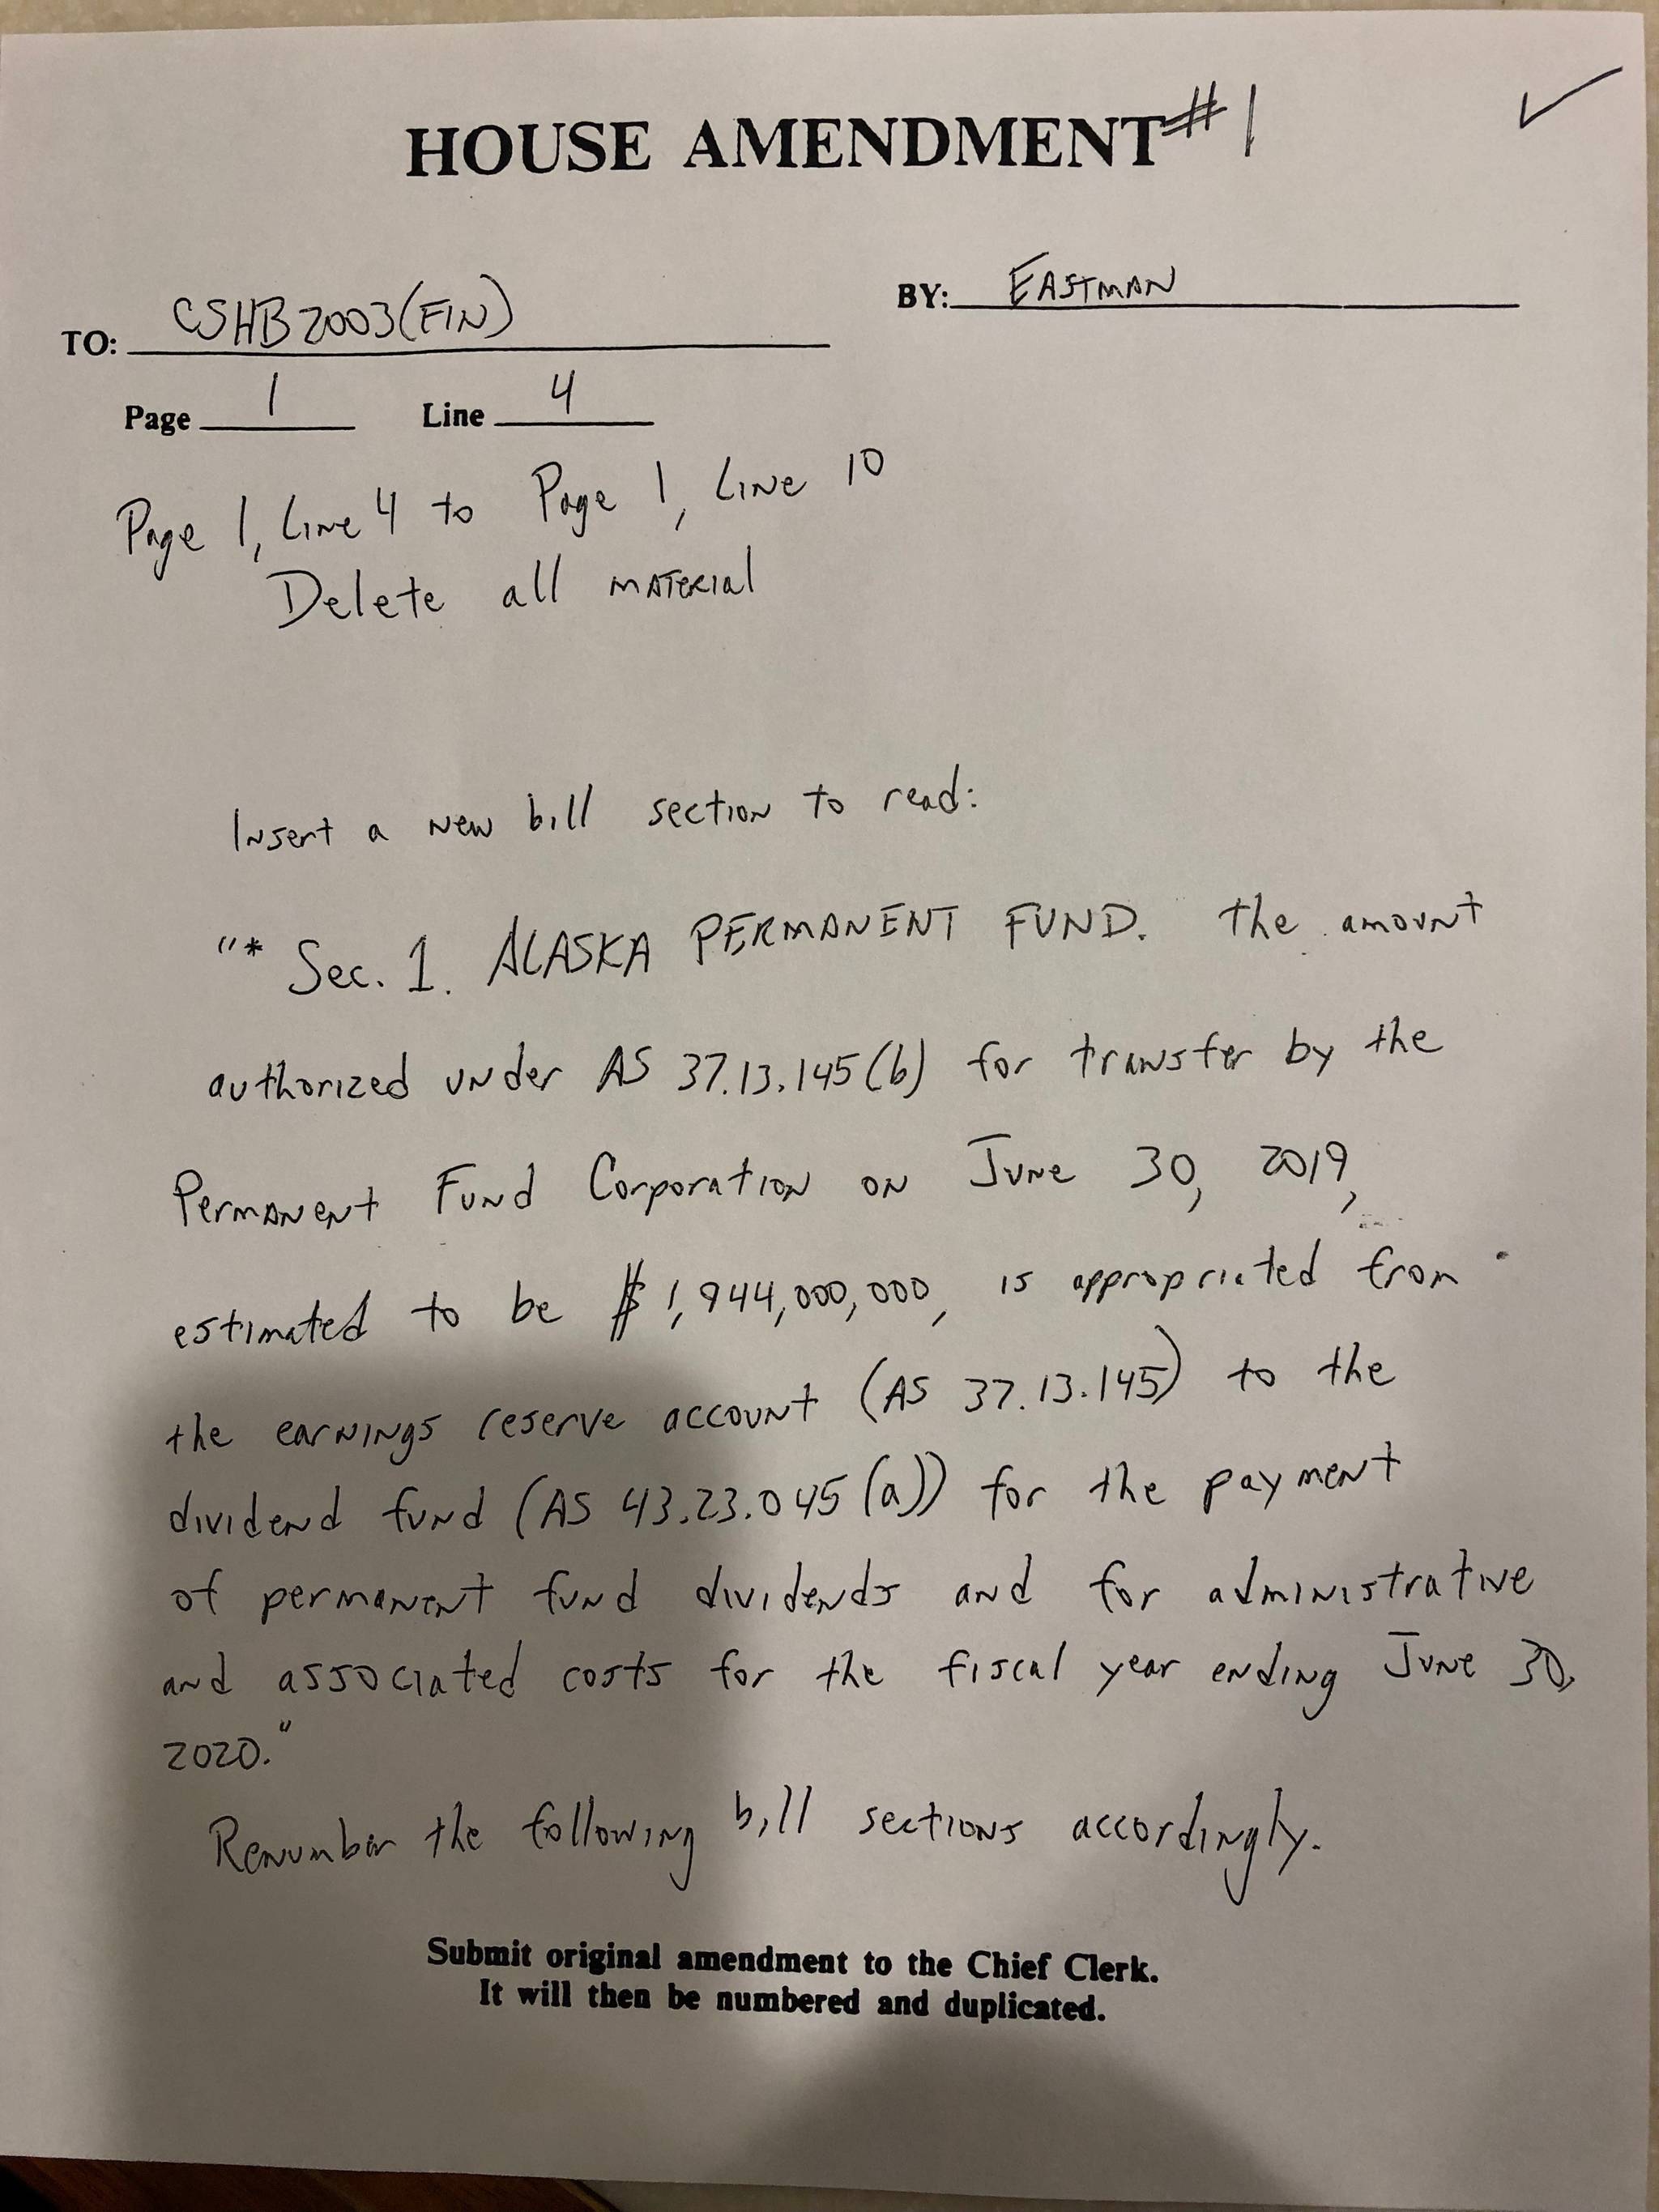 The text of Rep. Dan Eastman’s, R-Wasilla, amendment. Hand-written because of the speed at which the legislature is moving during the special session.